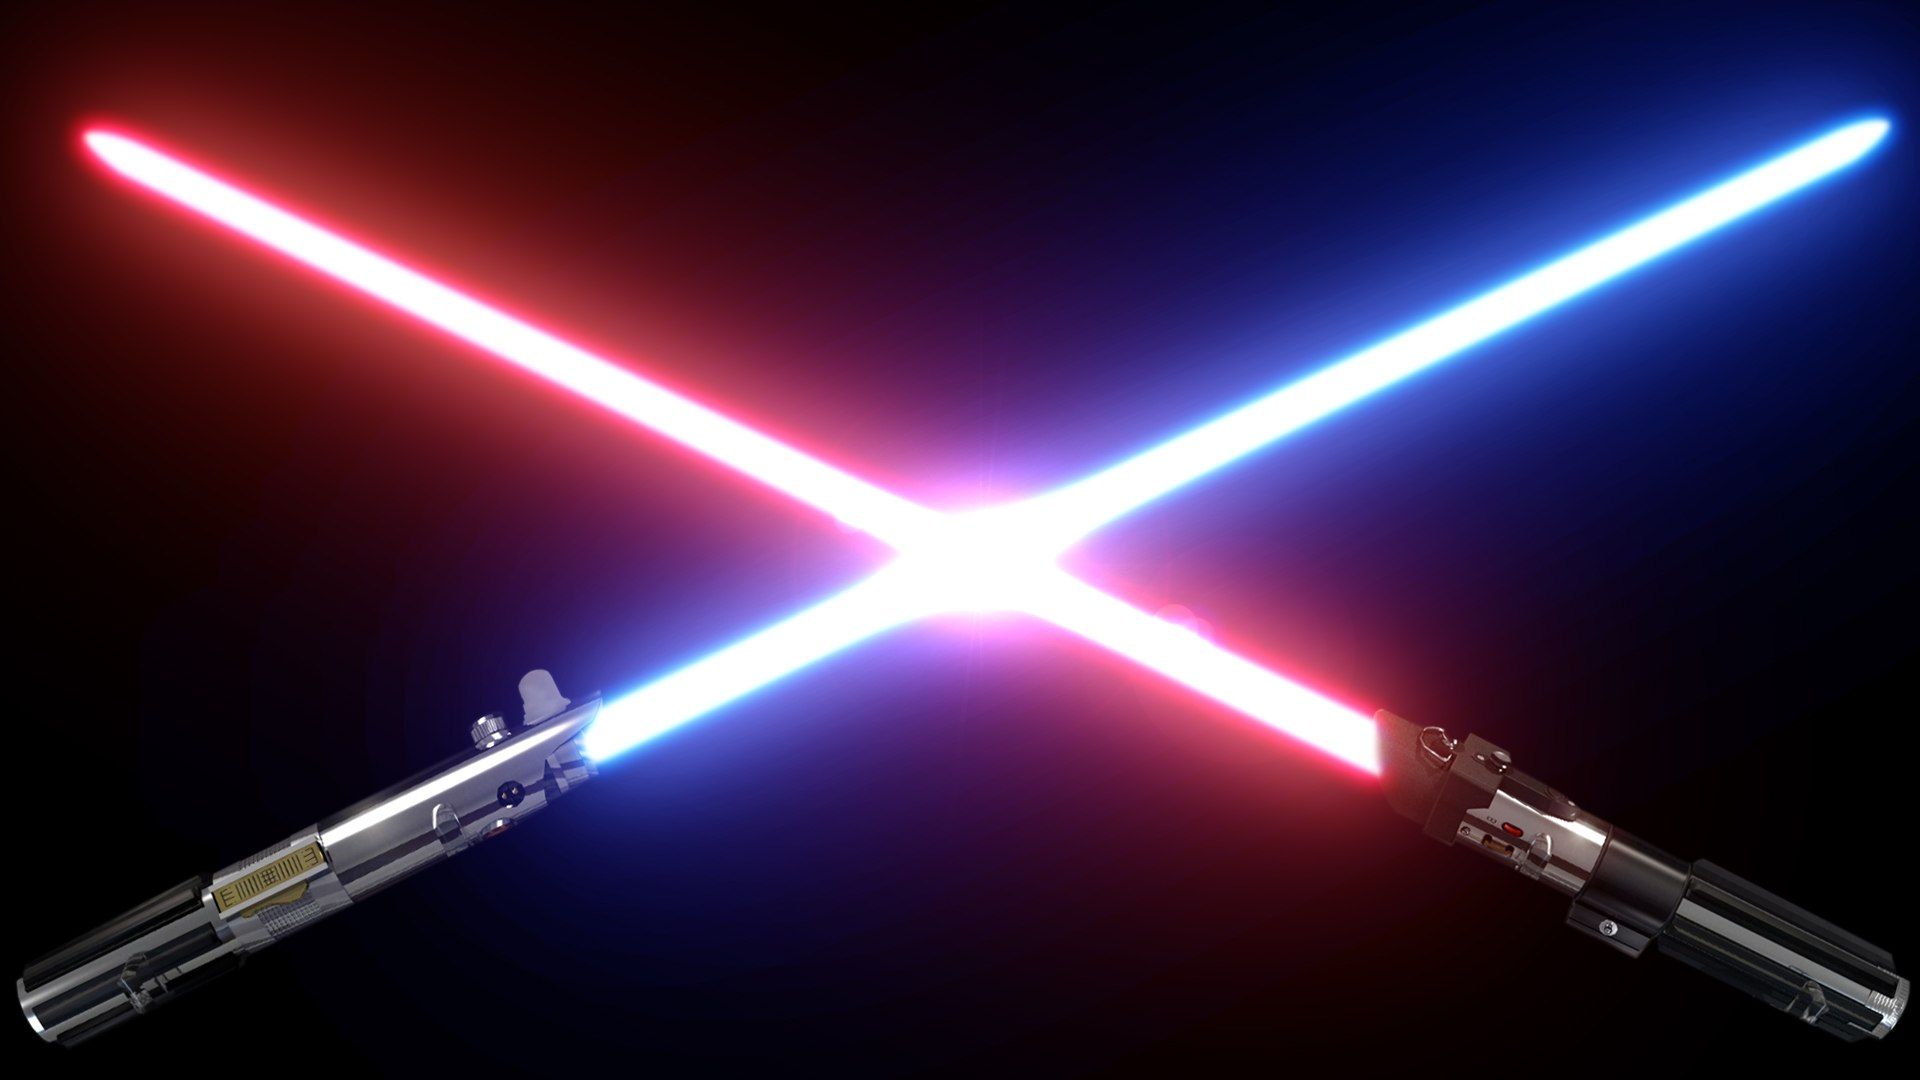 Red and blue lightsaber wallpaper 1920x1080 - (#34153) - High ...